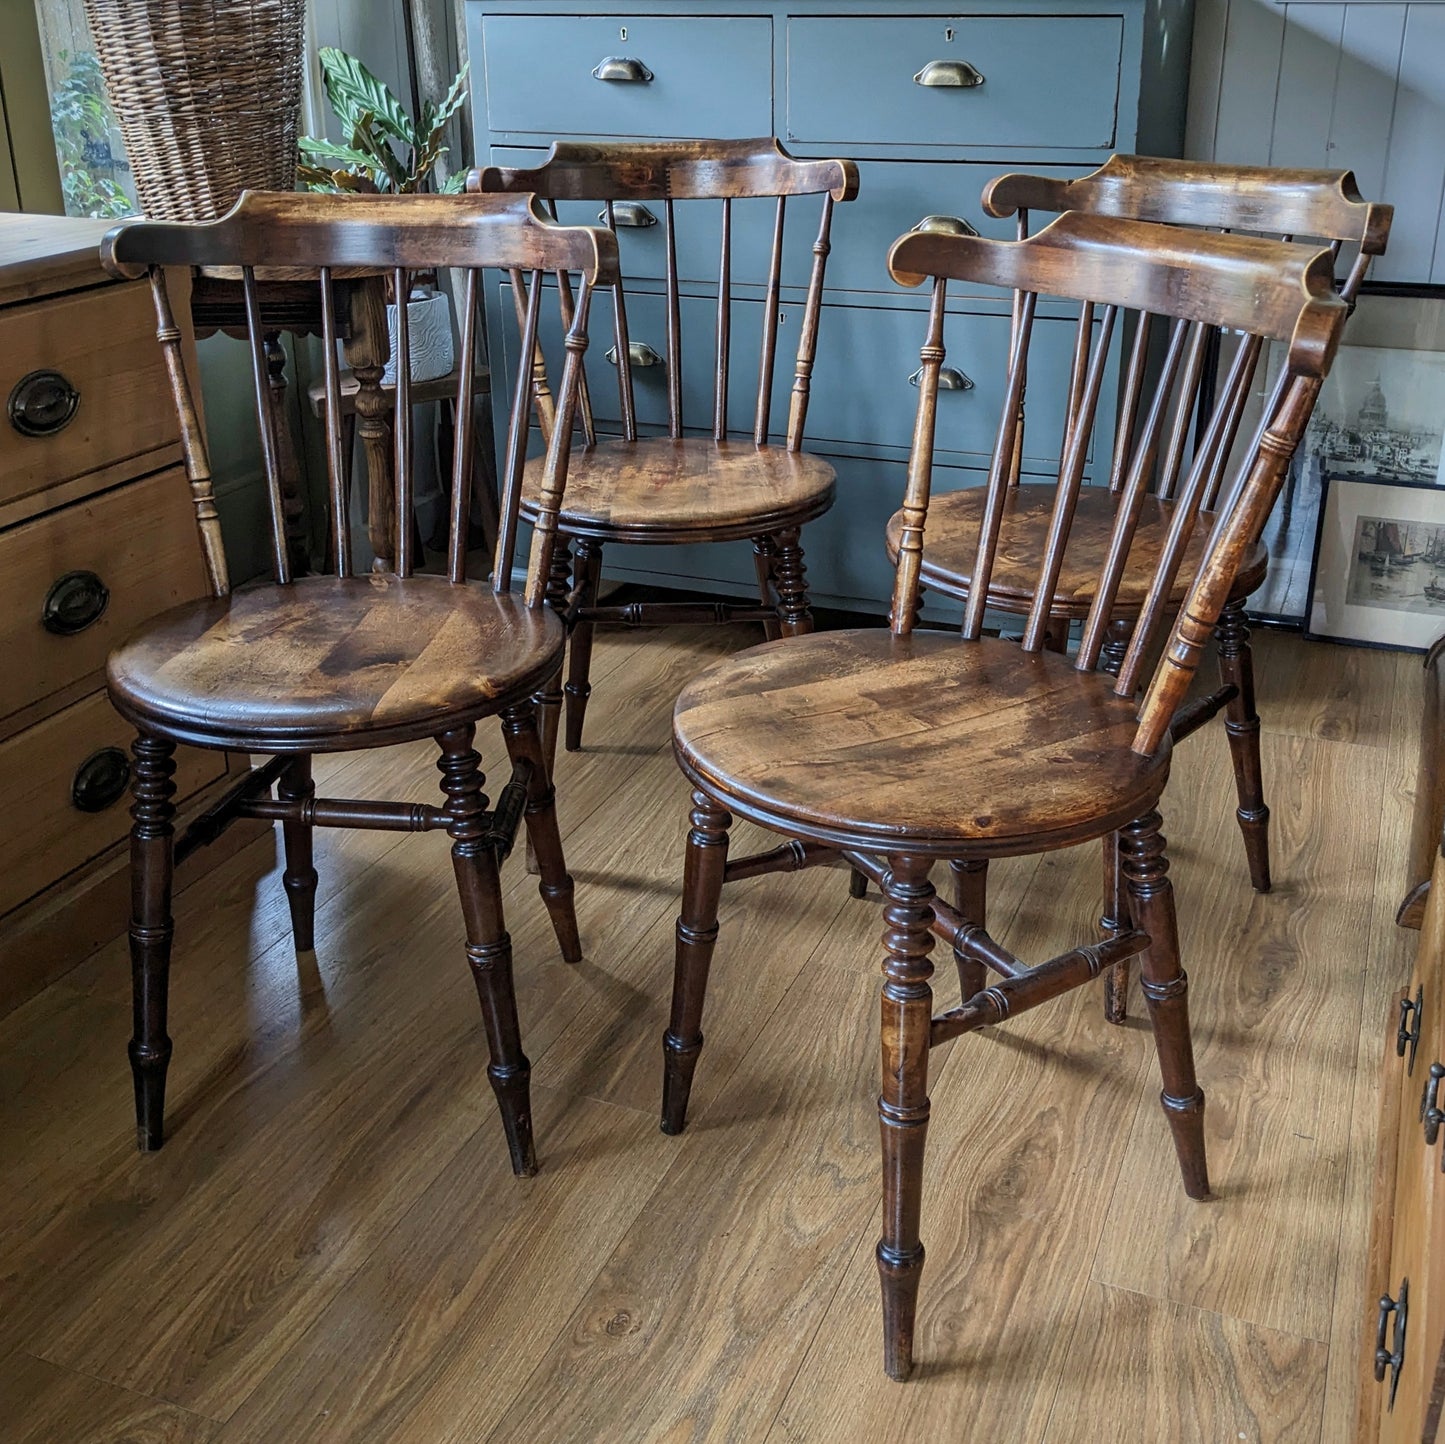 Four Swedish Antique Penny Chairs